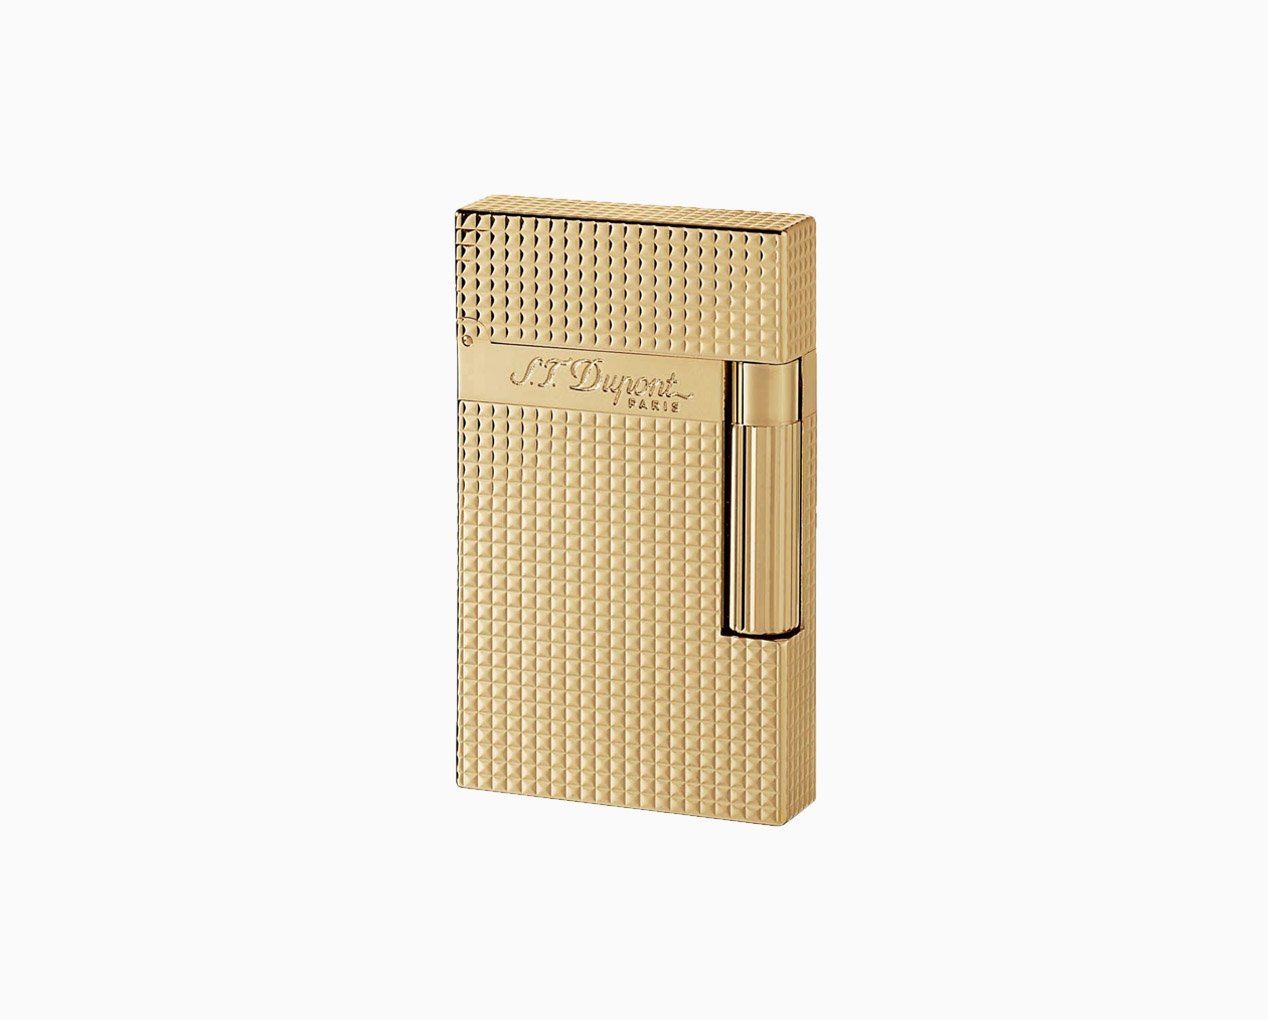 Diamond point lighter with gold finish - Luxury lighter | S.T. Dupont